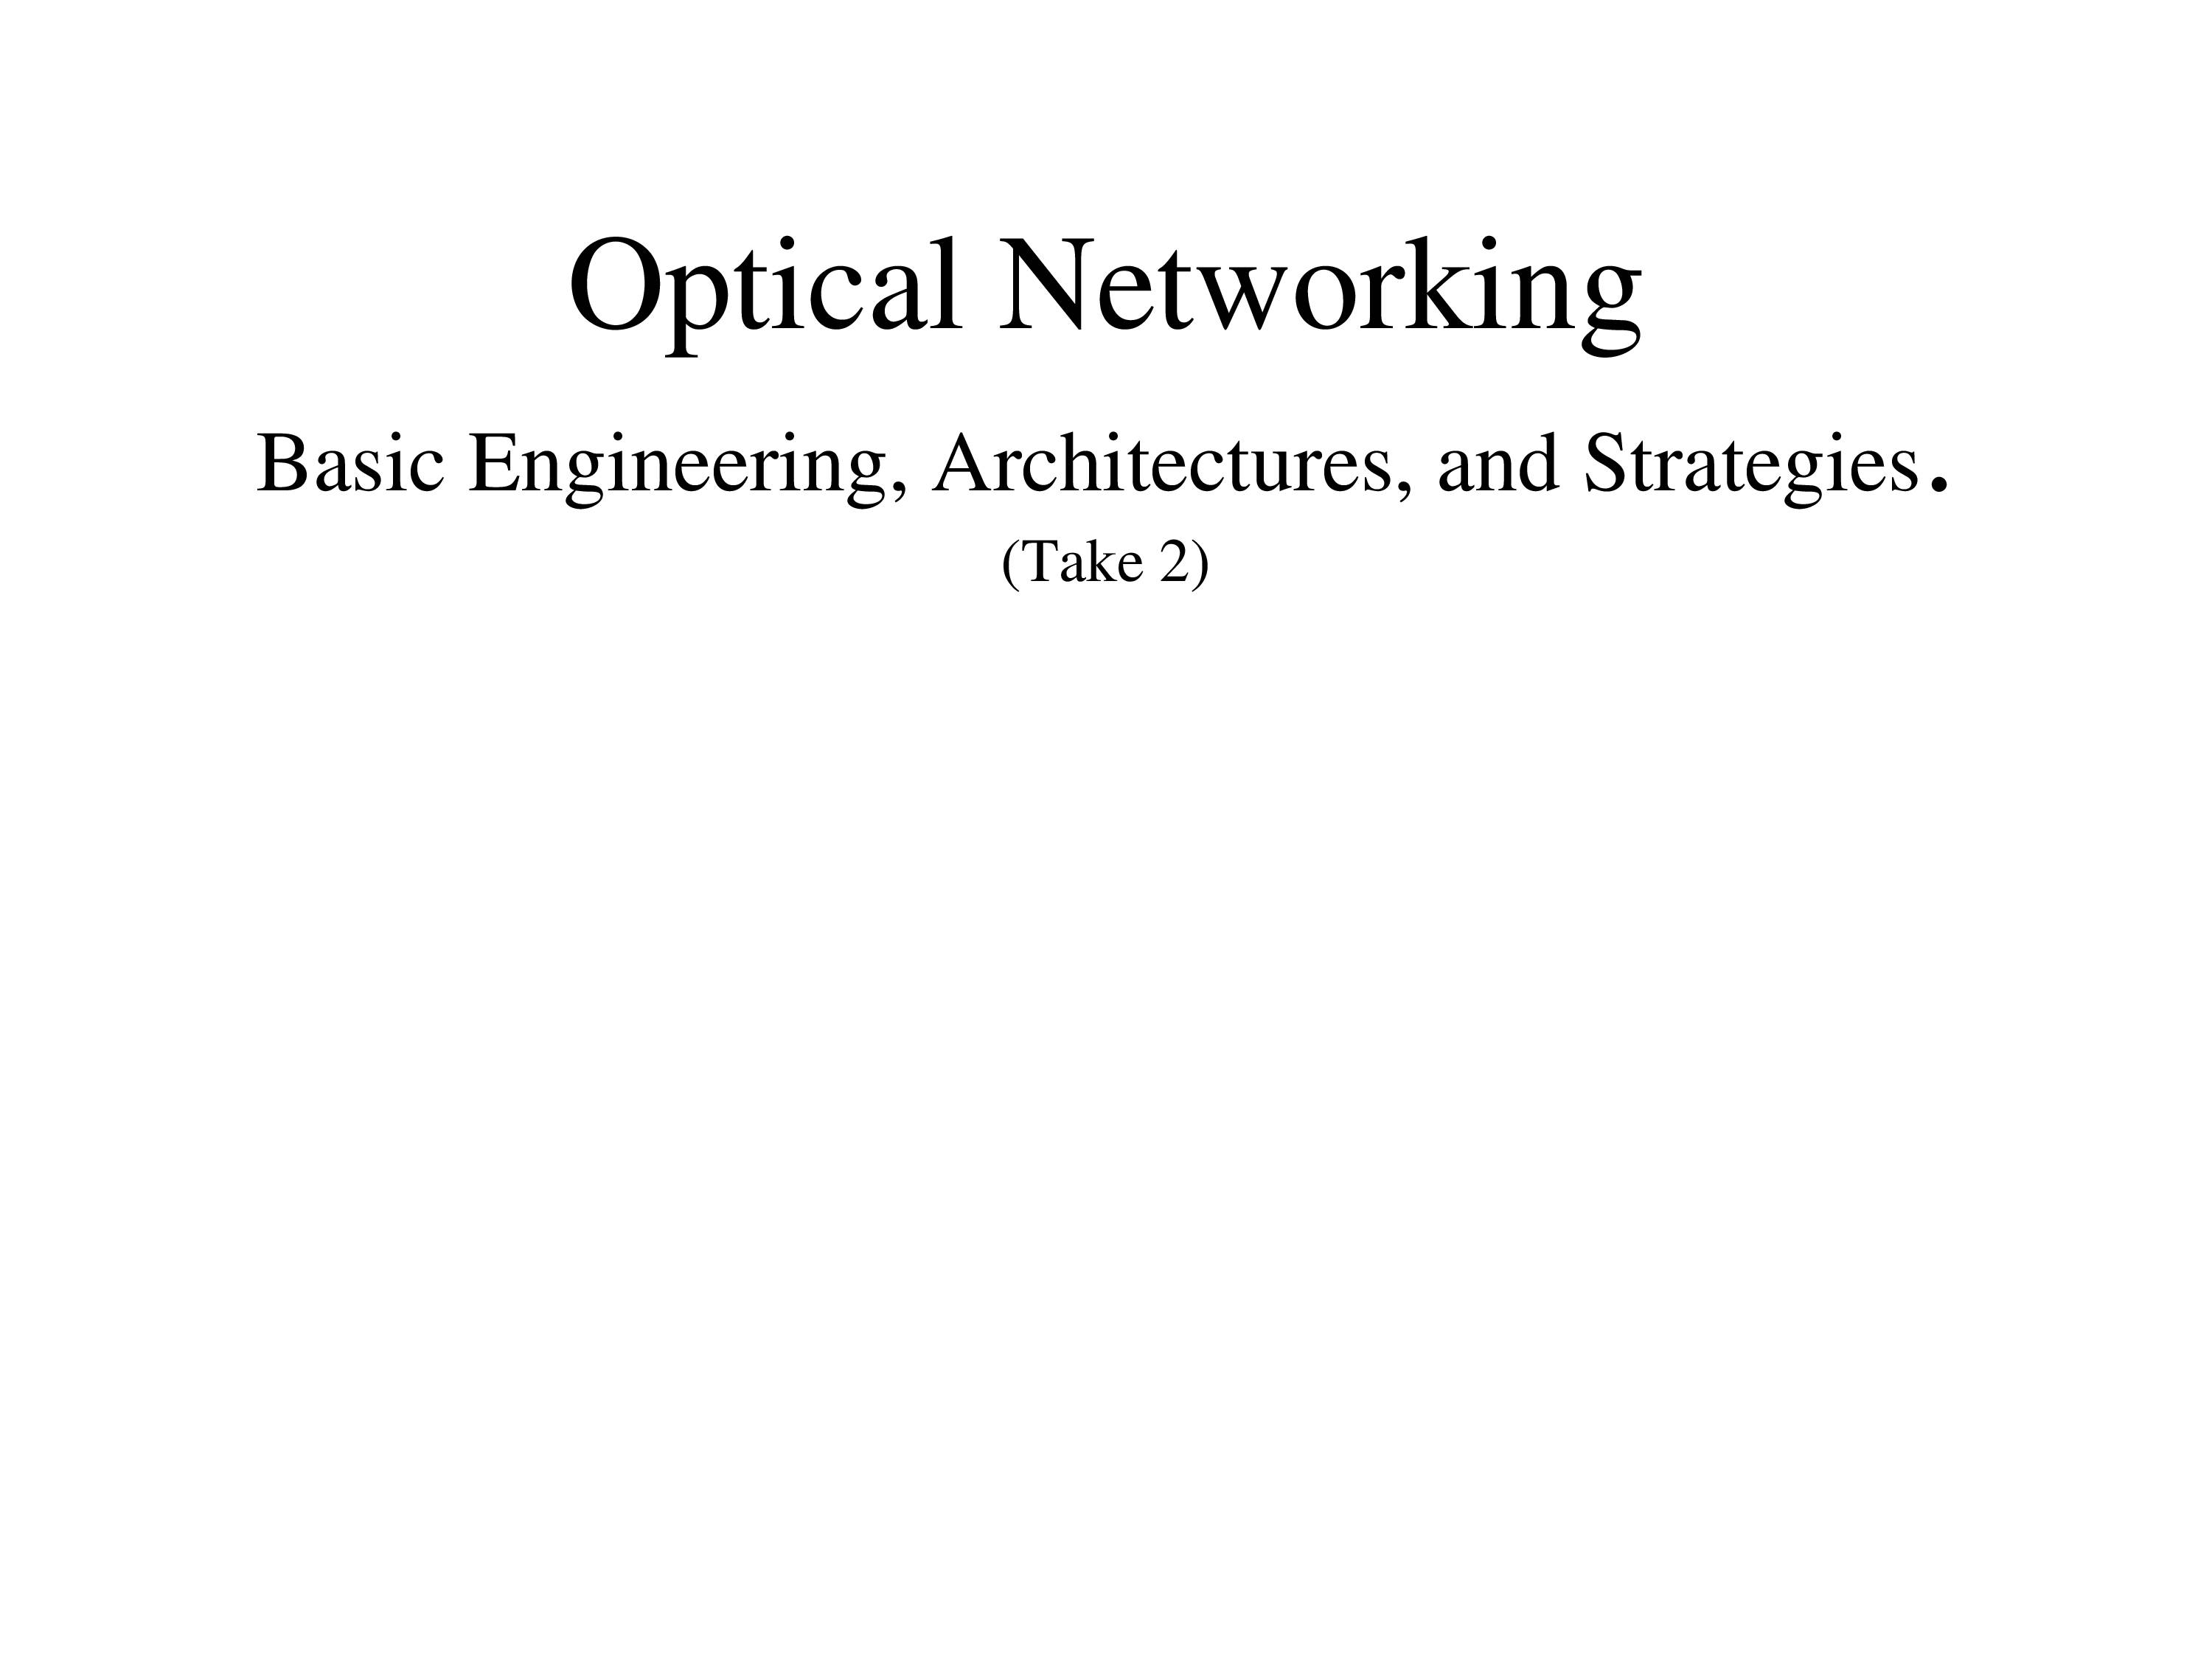 PPT On Optical Networking